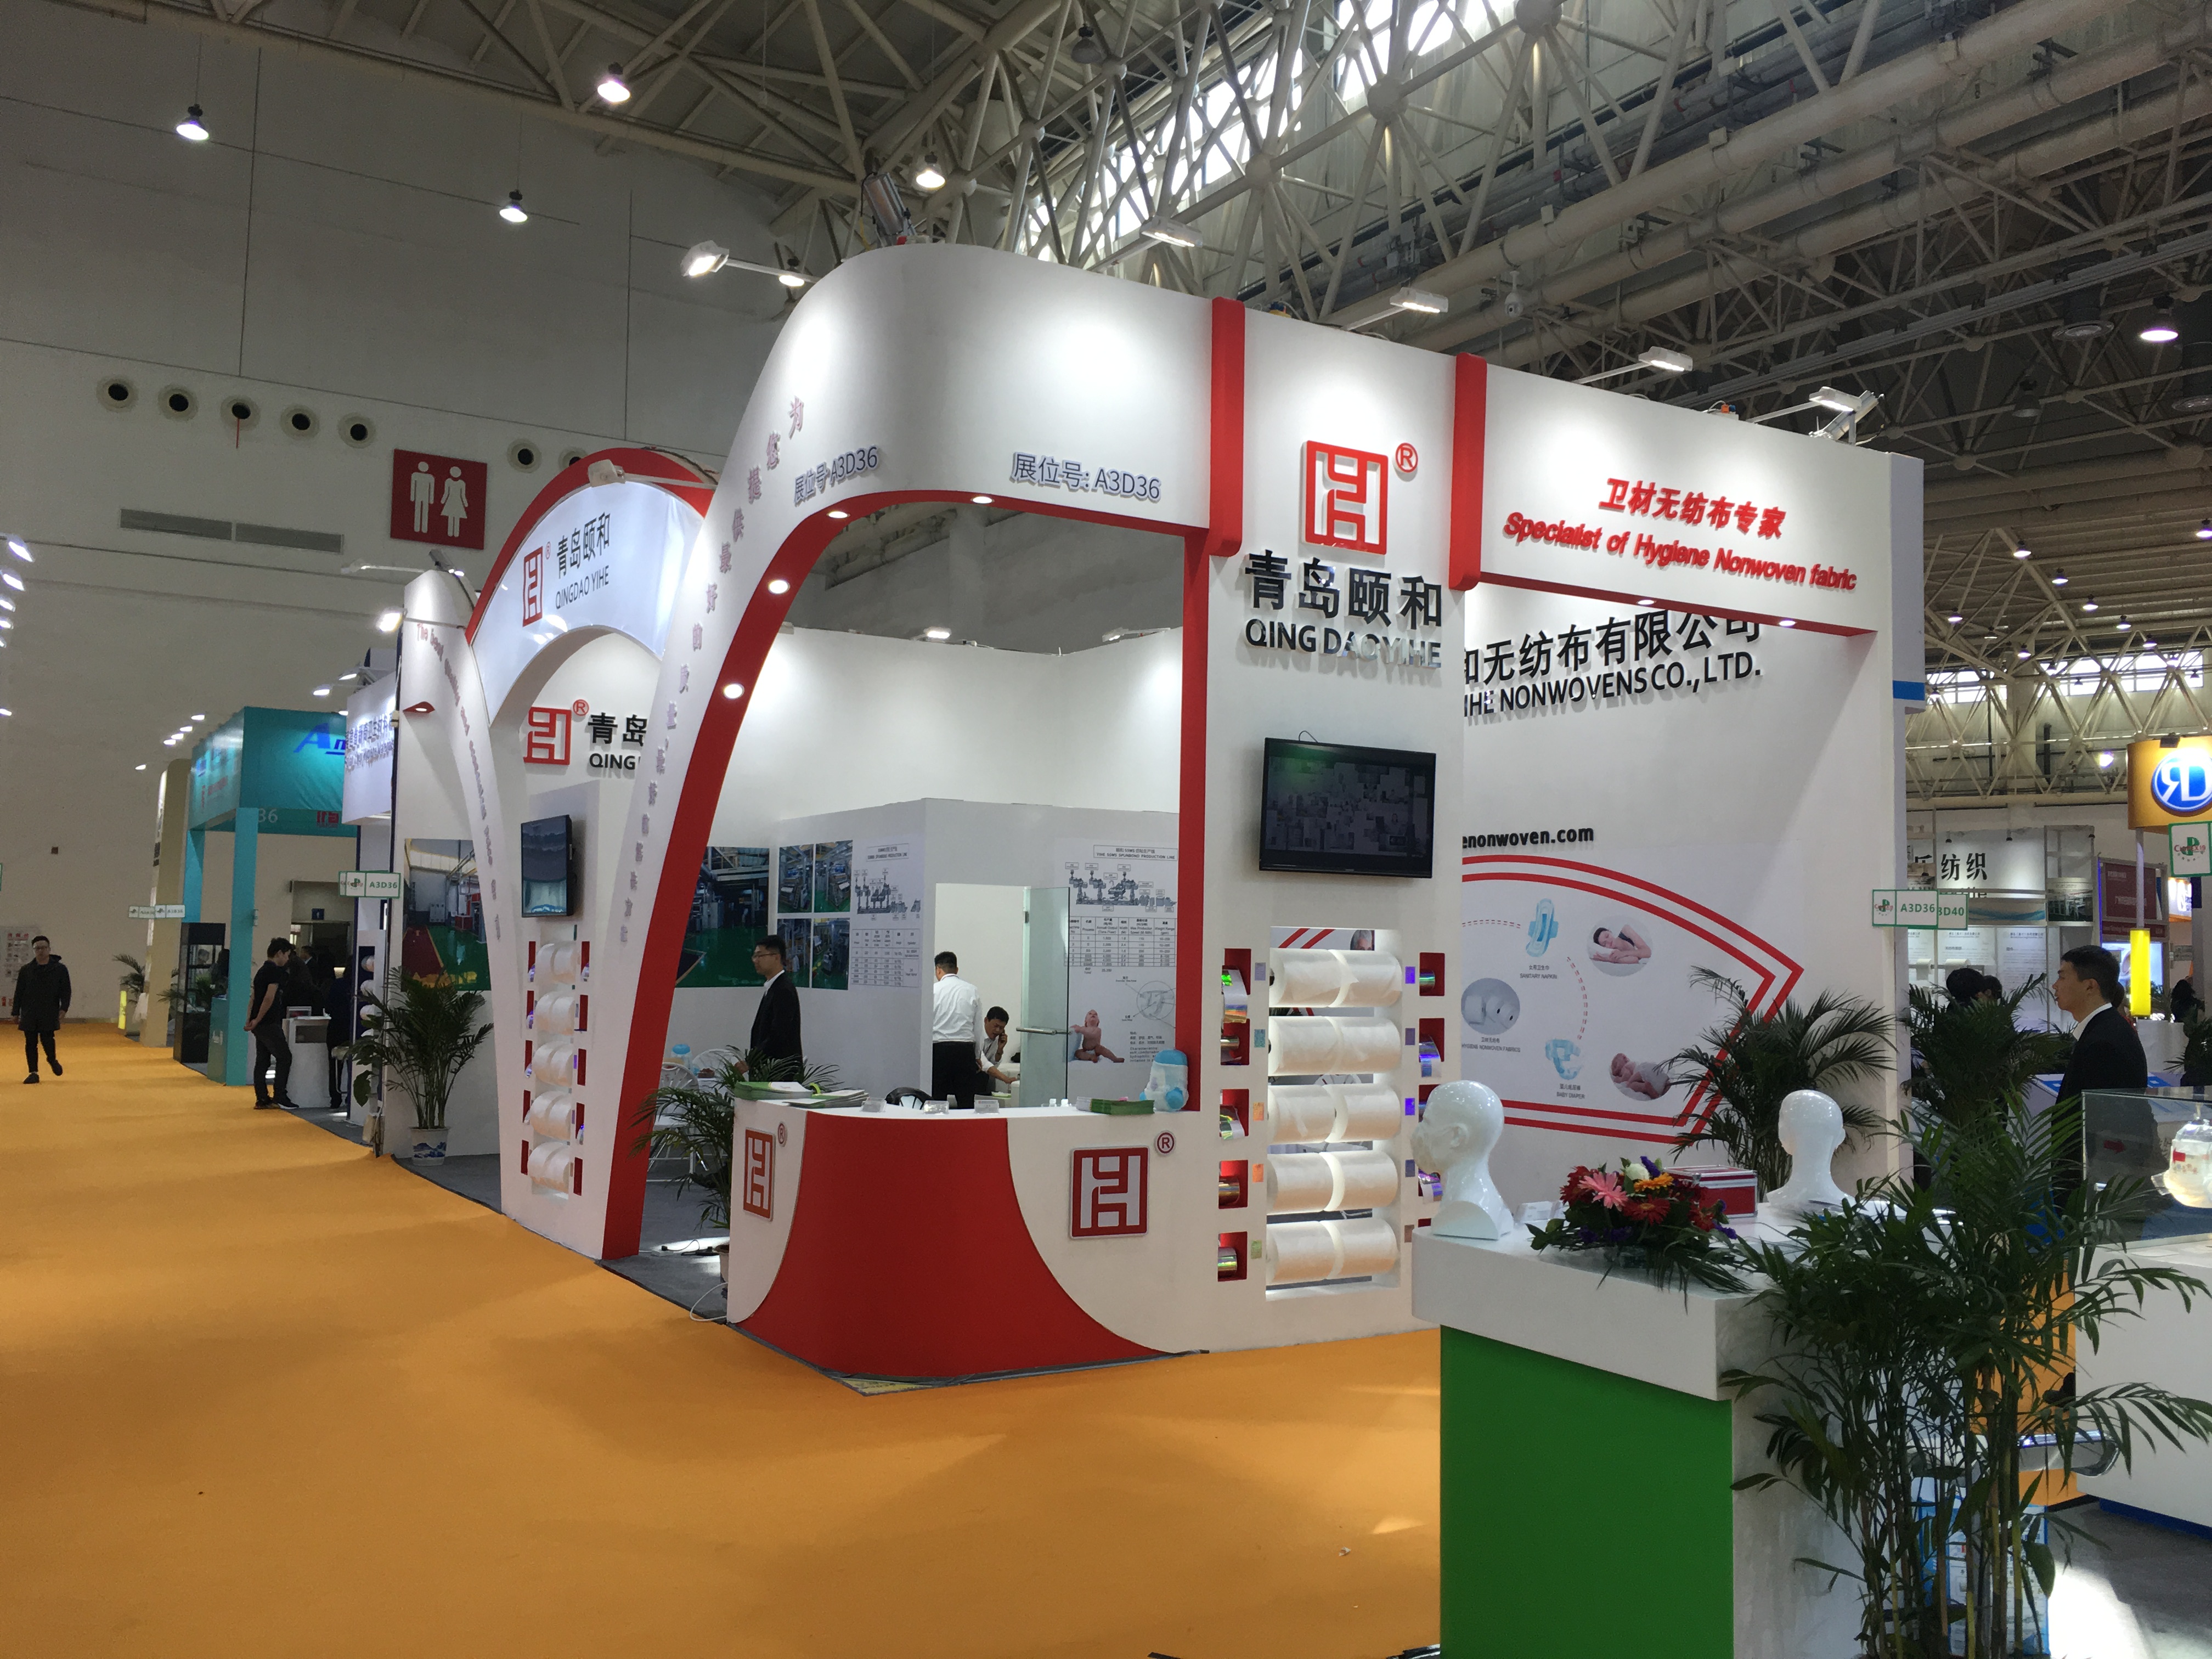 Review of Wuhan tissue Exhibition